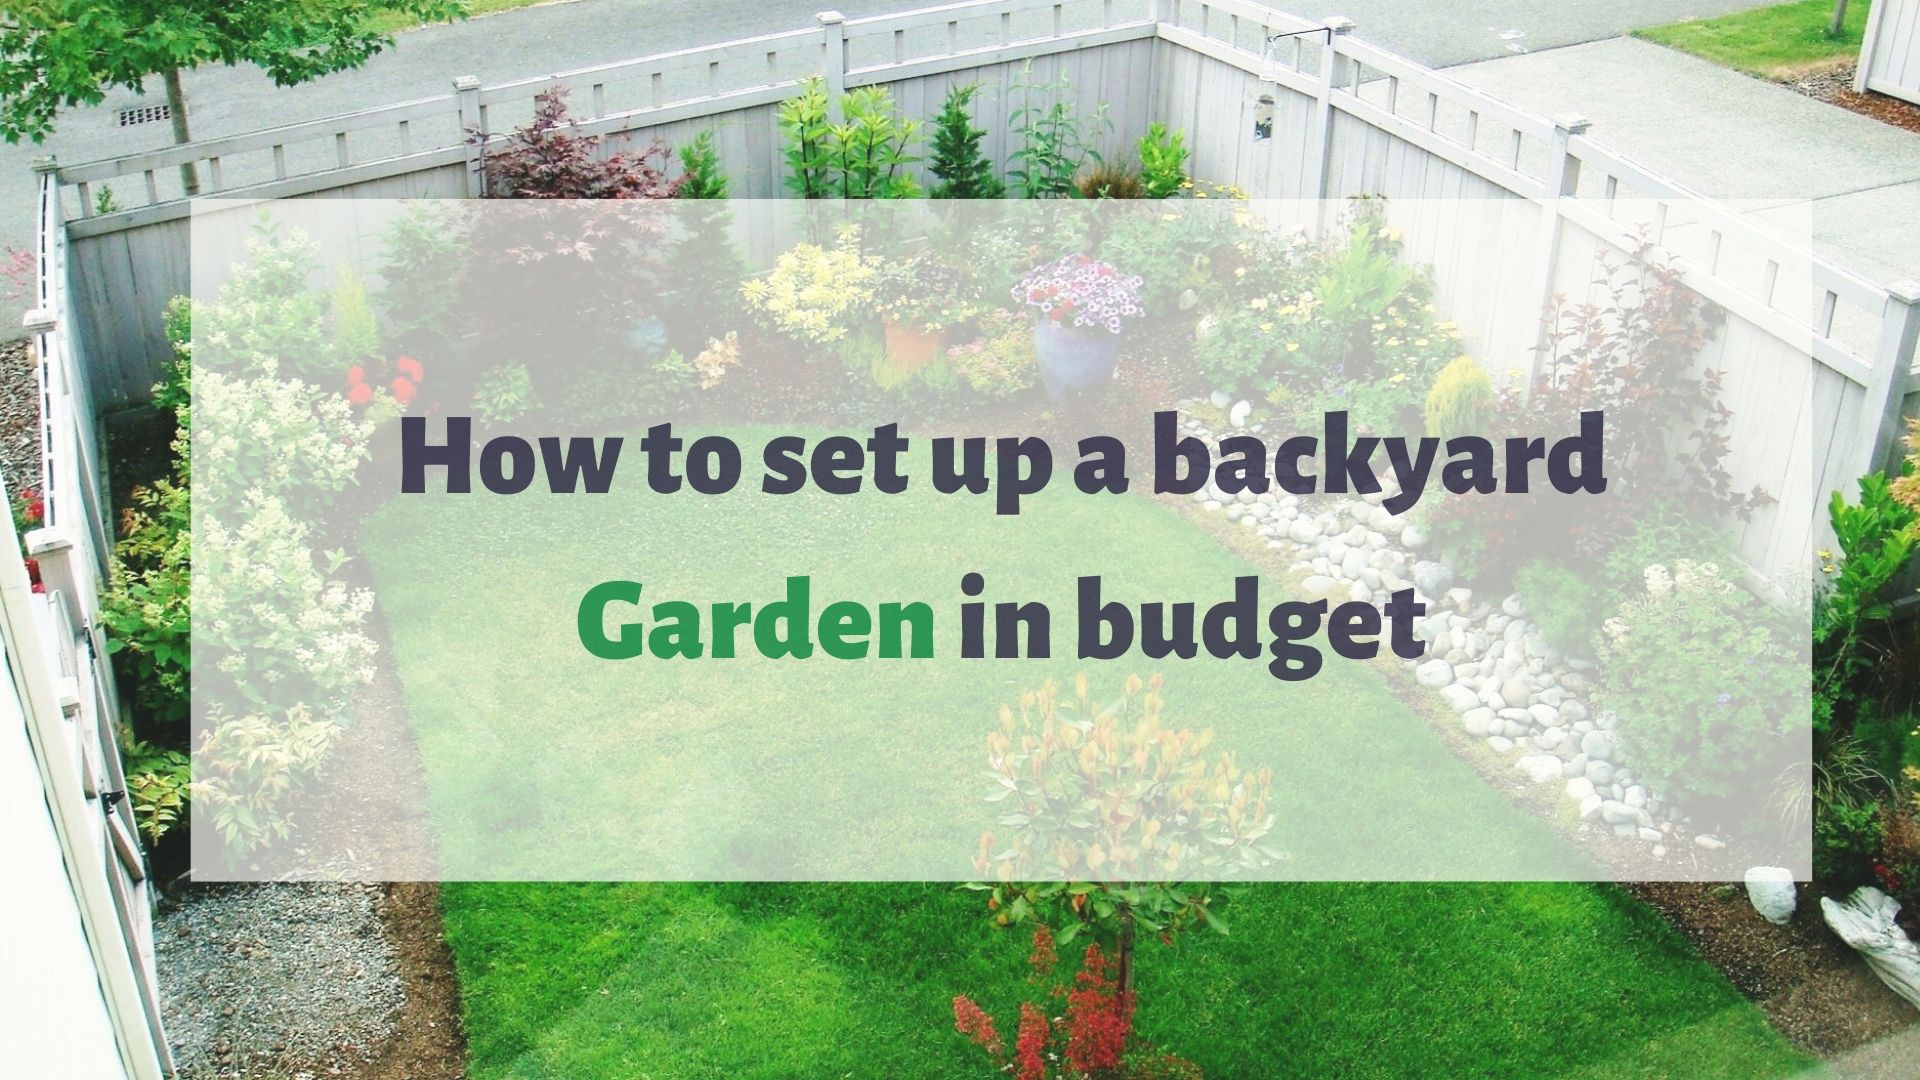 Setting up a backyard garden? 13 ways to complete the project on budget